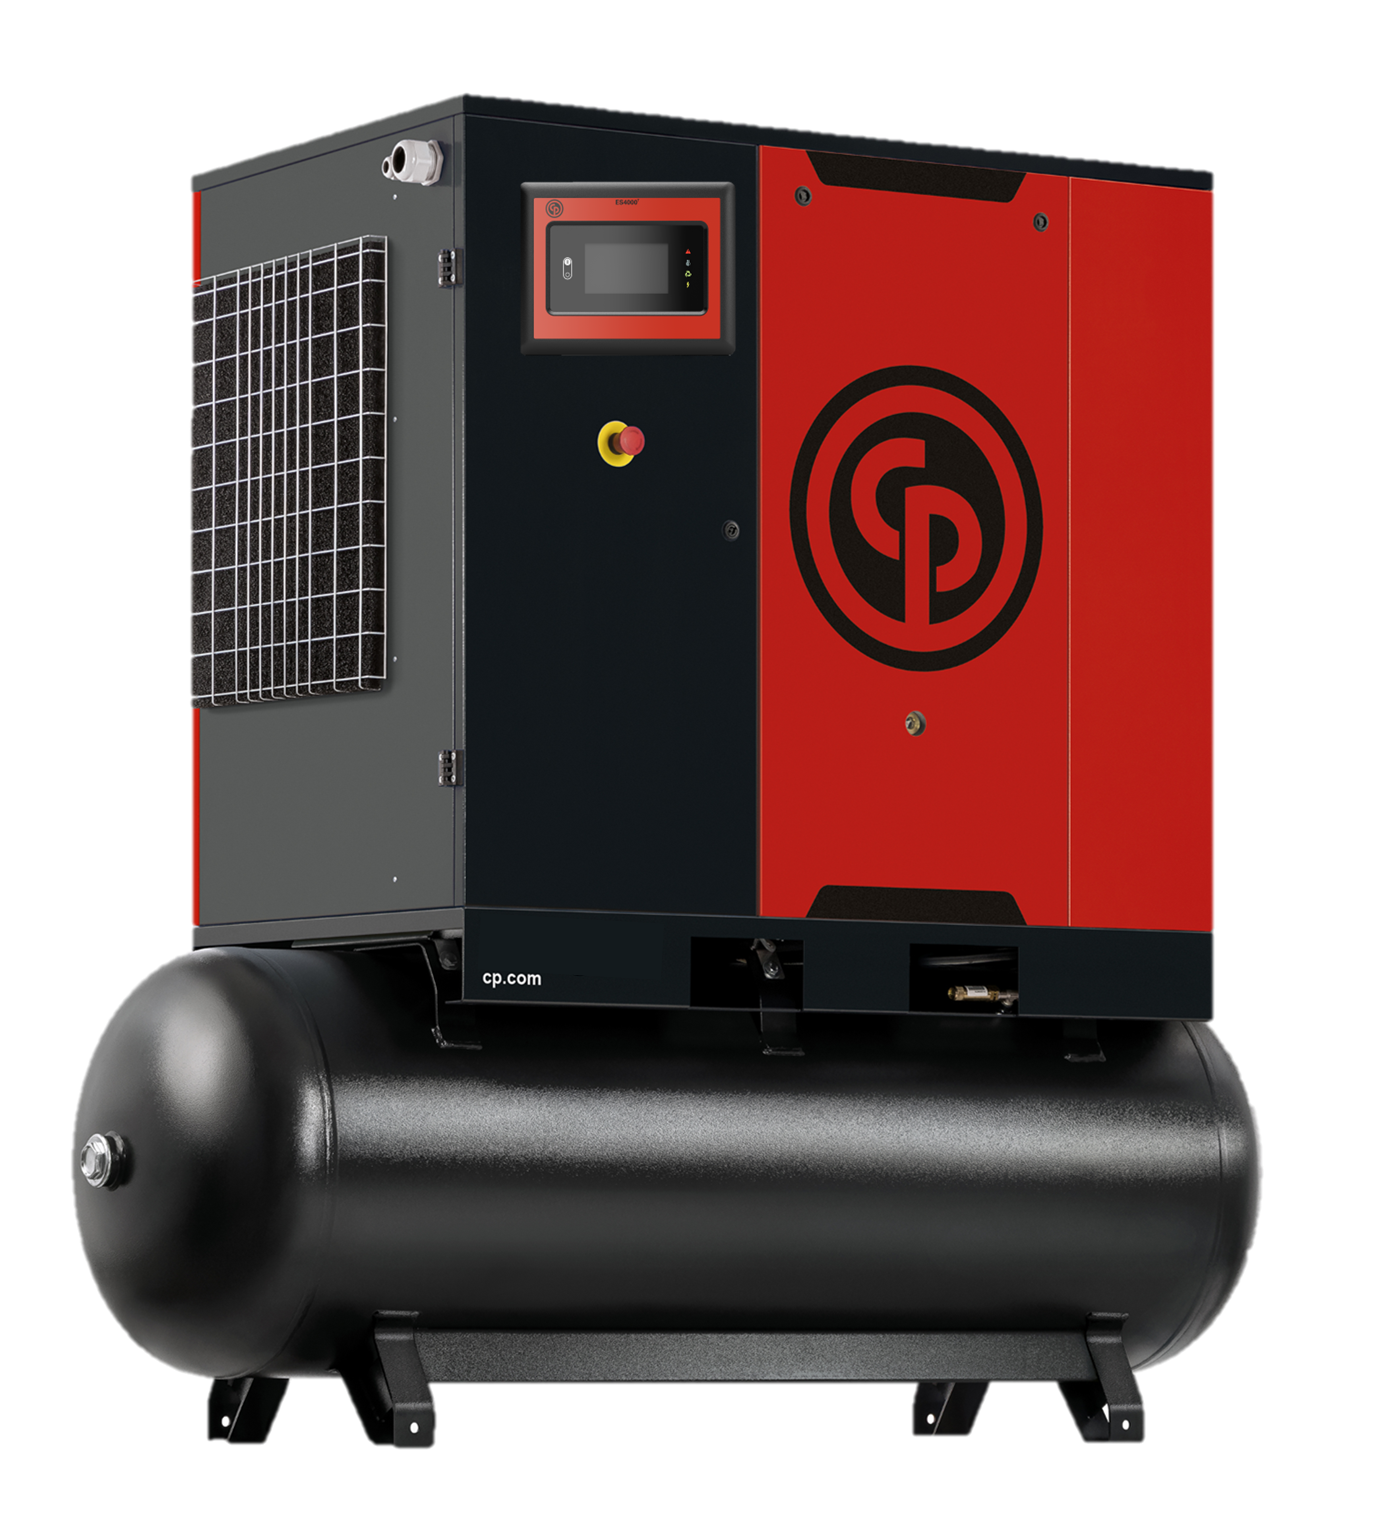 Chicago Pneumatic CPBg 35 HP Tank Mount Rotary Screw Air Compressor | 129.9 CFM@150 PSI, 208-230/460 volt, 3 Phase | 4152030670